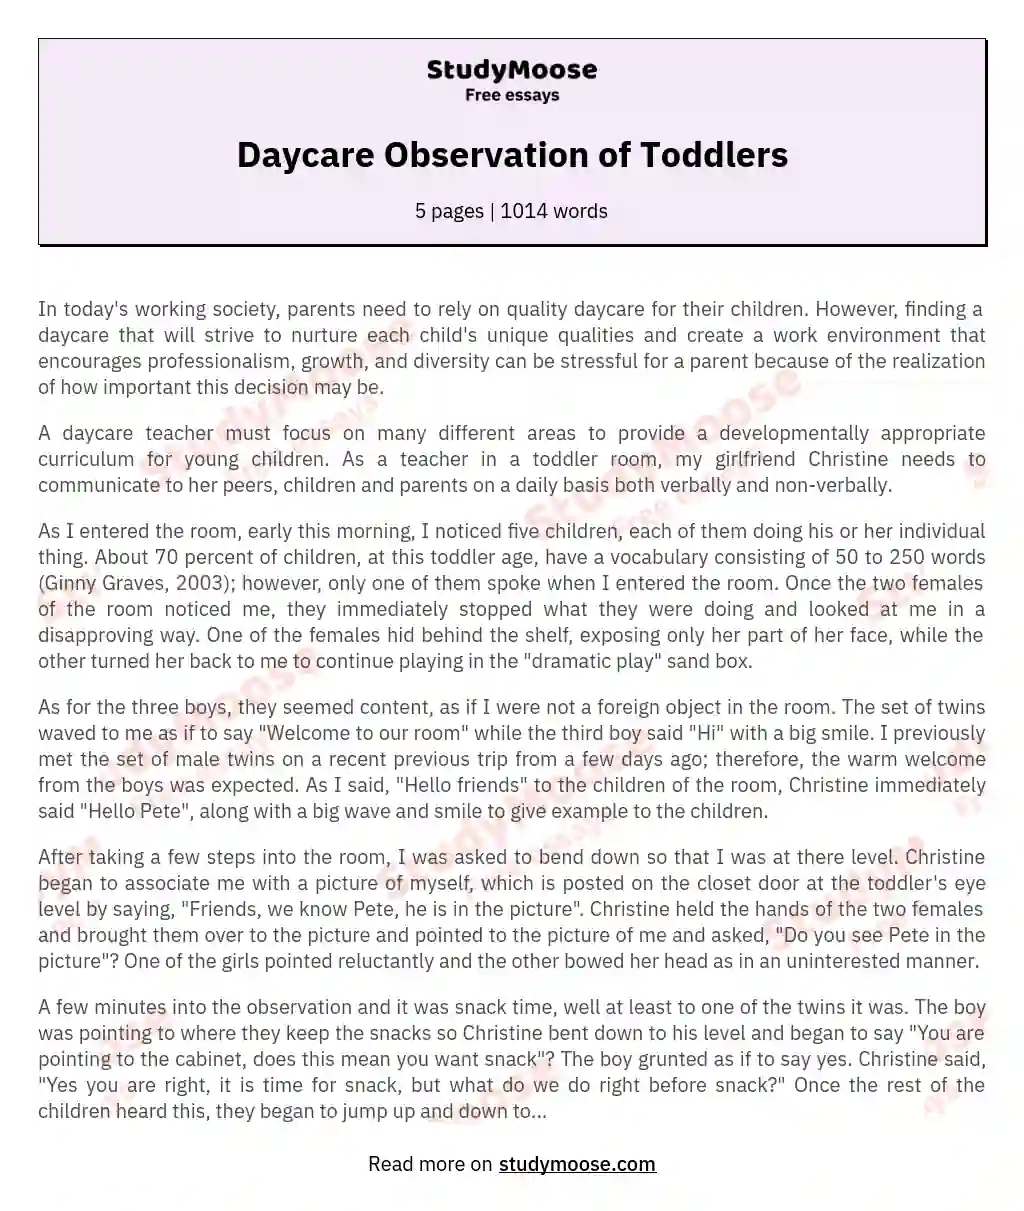 Daycare Observation of Toddlers essay